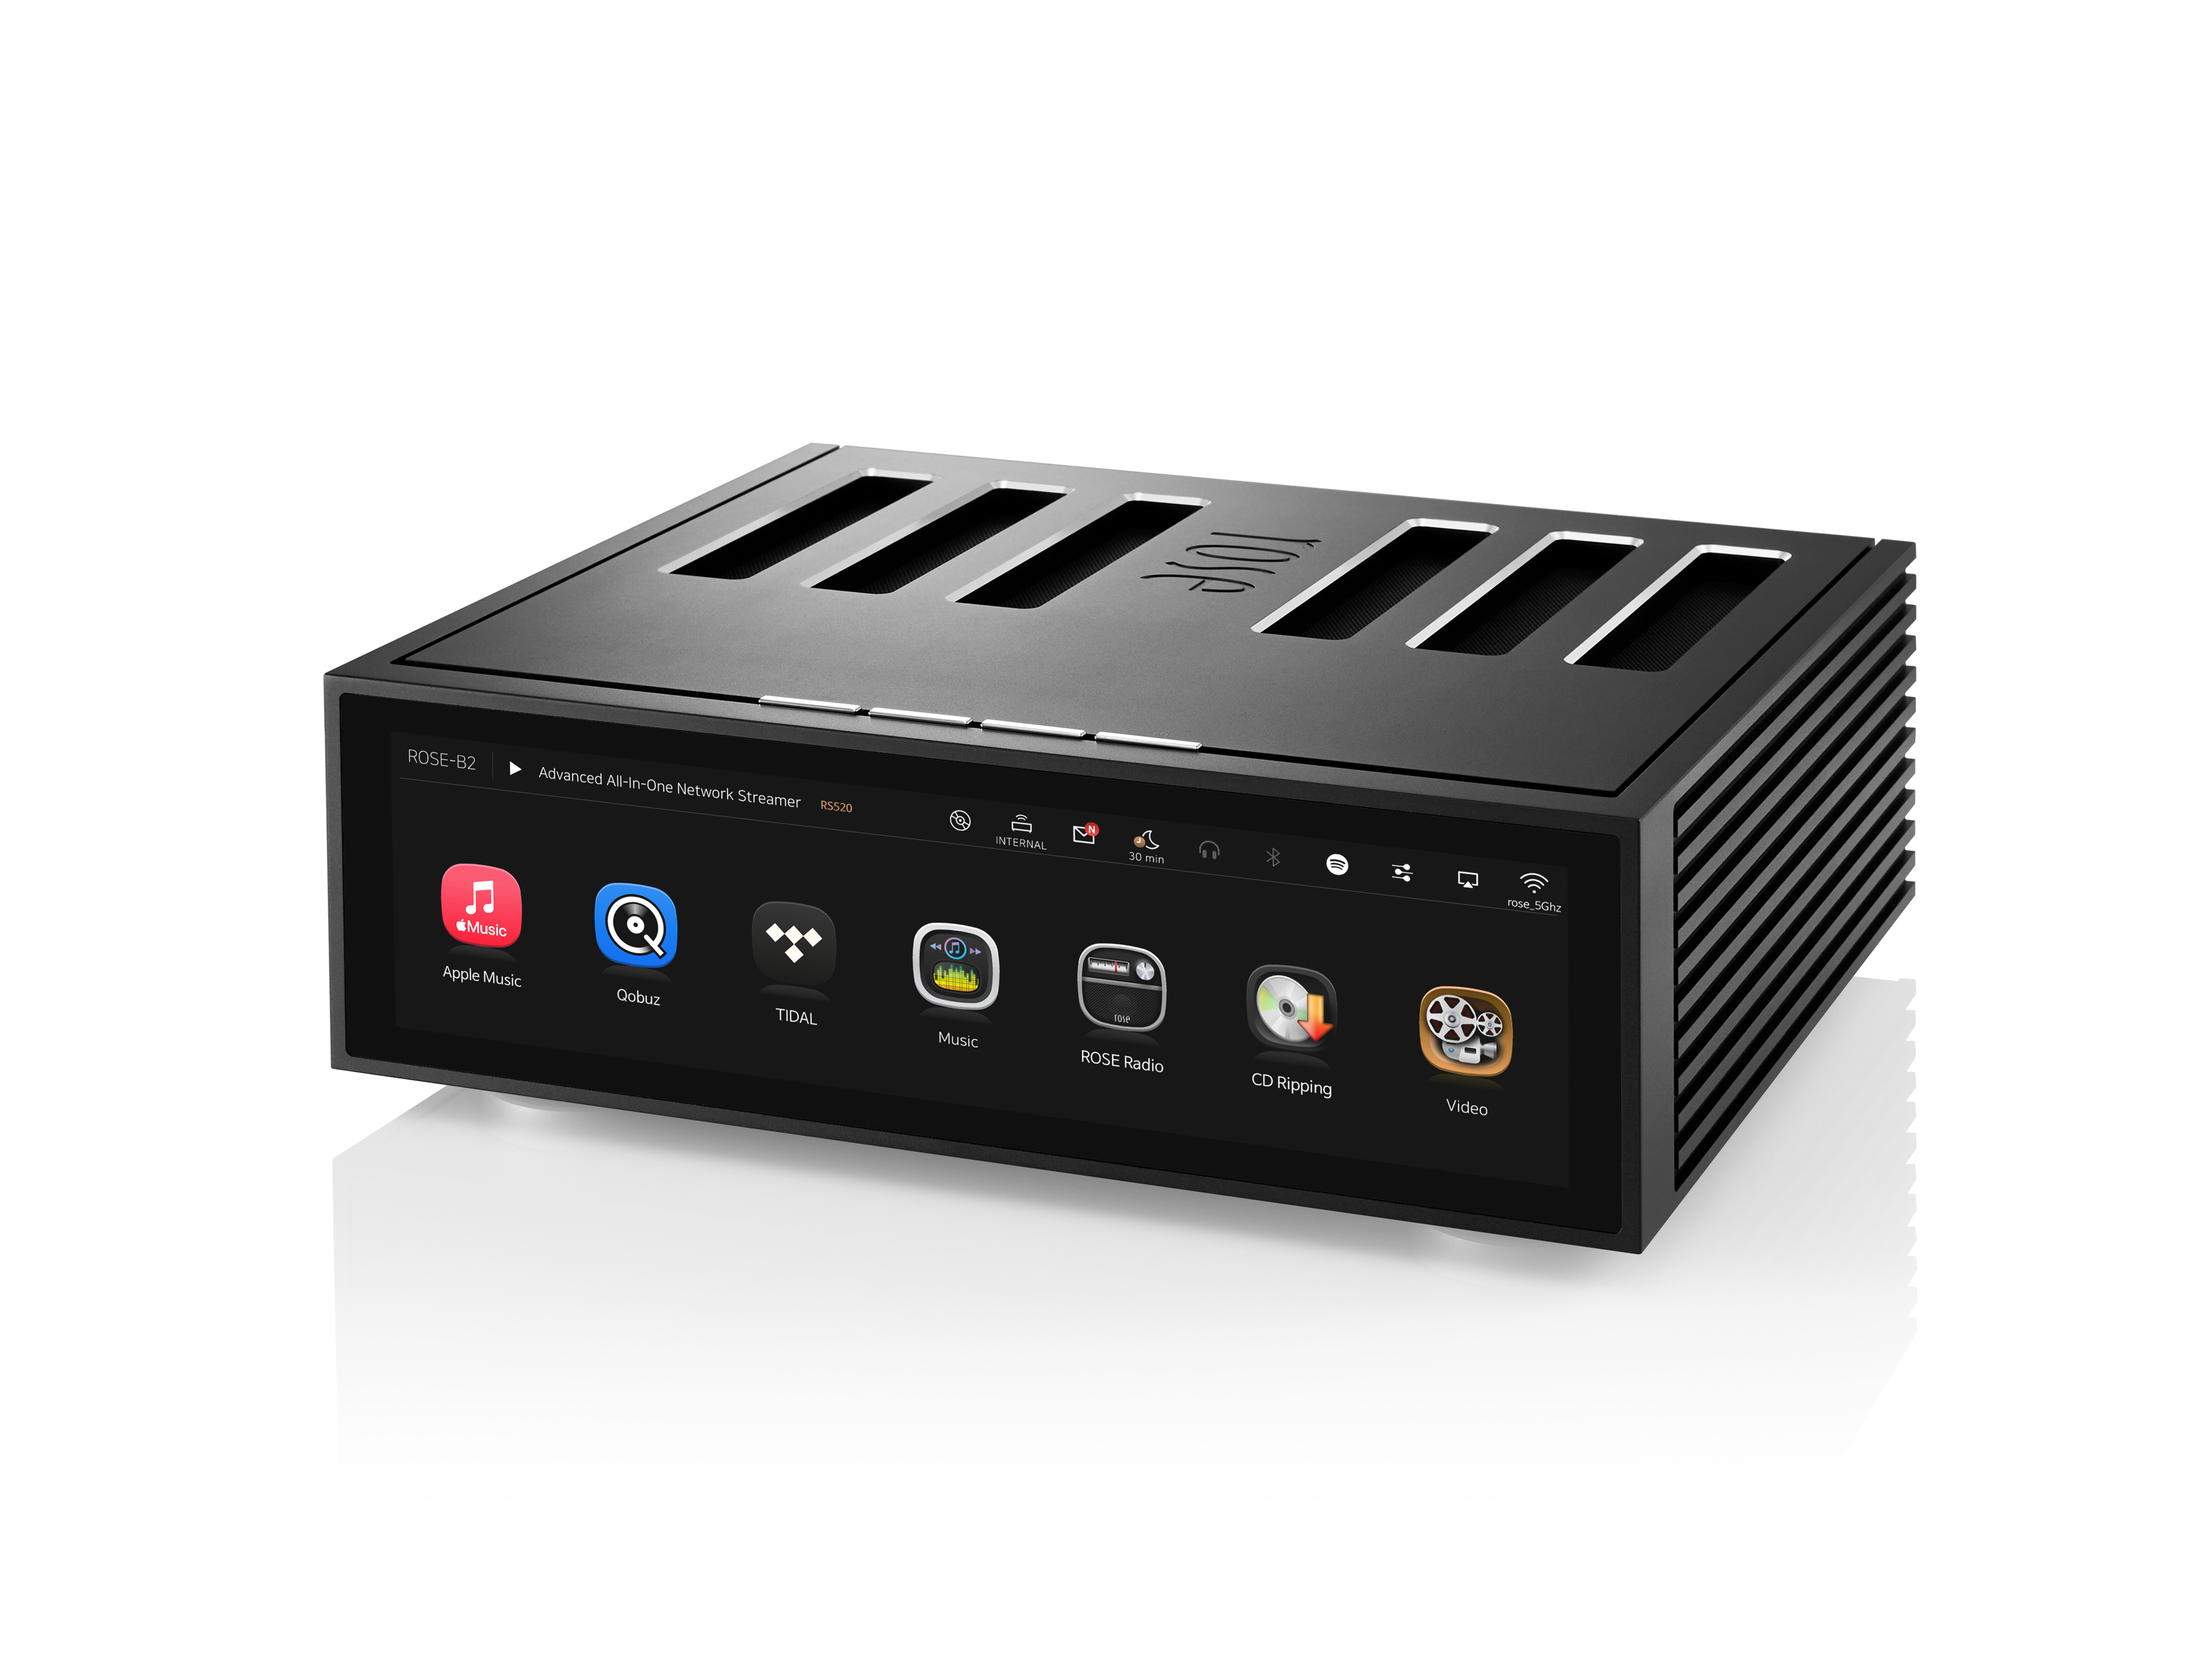 RS520 - Advanced All-In-One Network Streamer